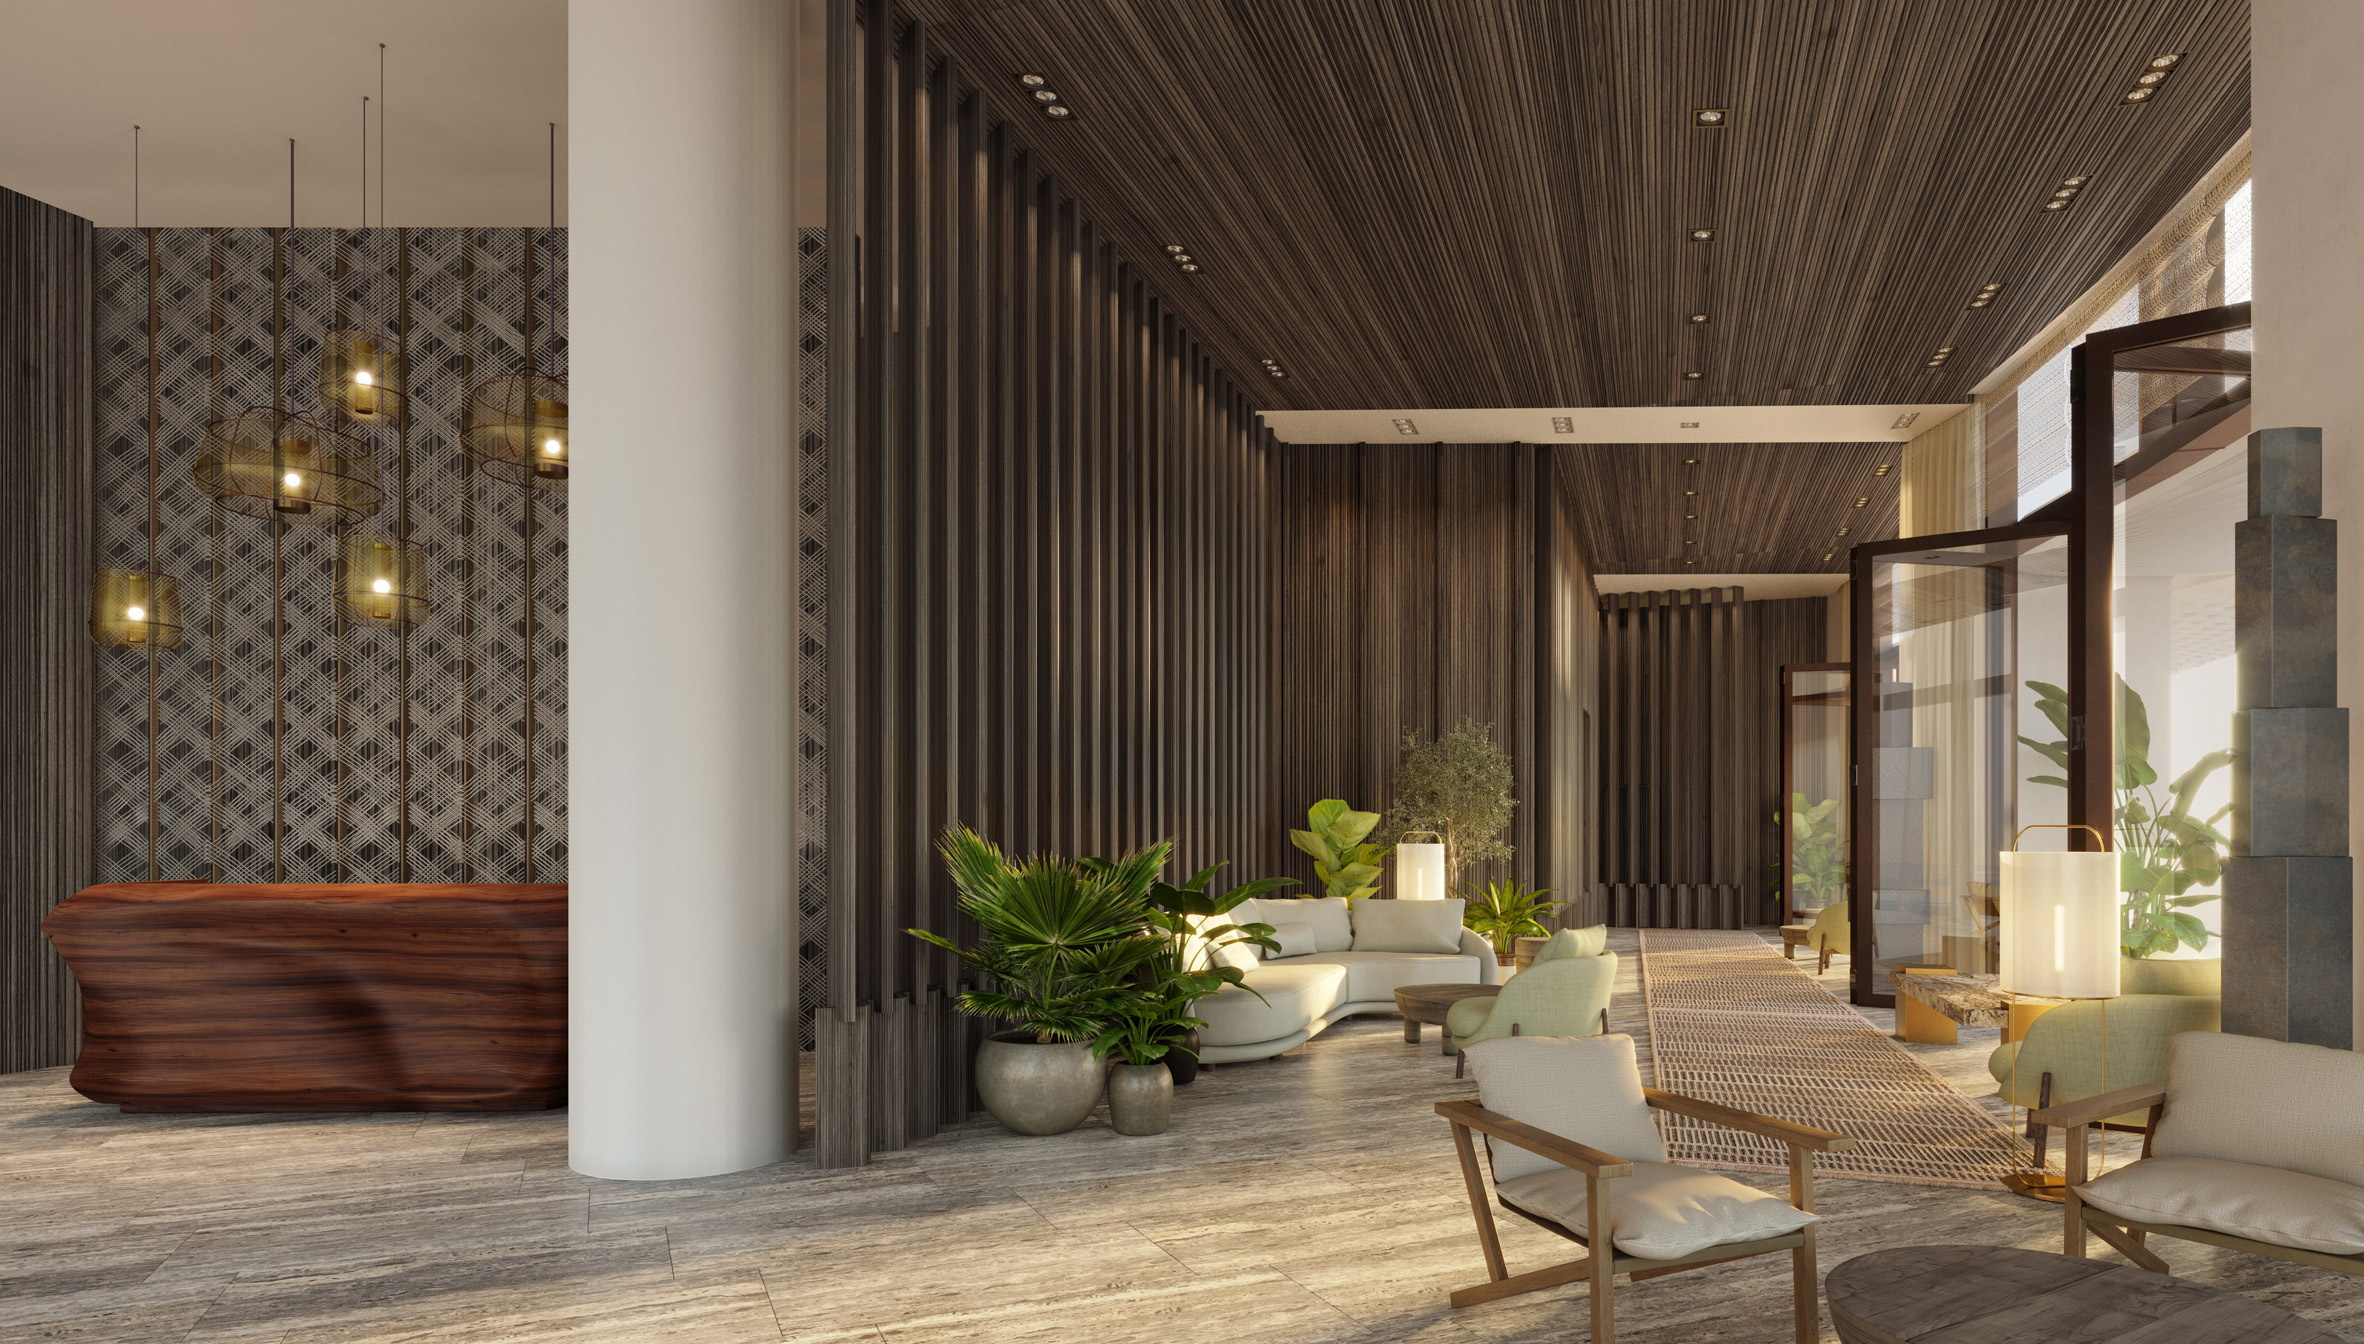 WARD VILLAGE® WELCOMES RESIDENTS TO KŌʻULA® WITH OPENING OF NEW RESIDENTIAL  TOWER DESIGNED BY STUDIO GANG